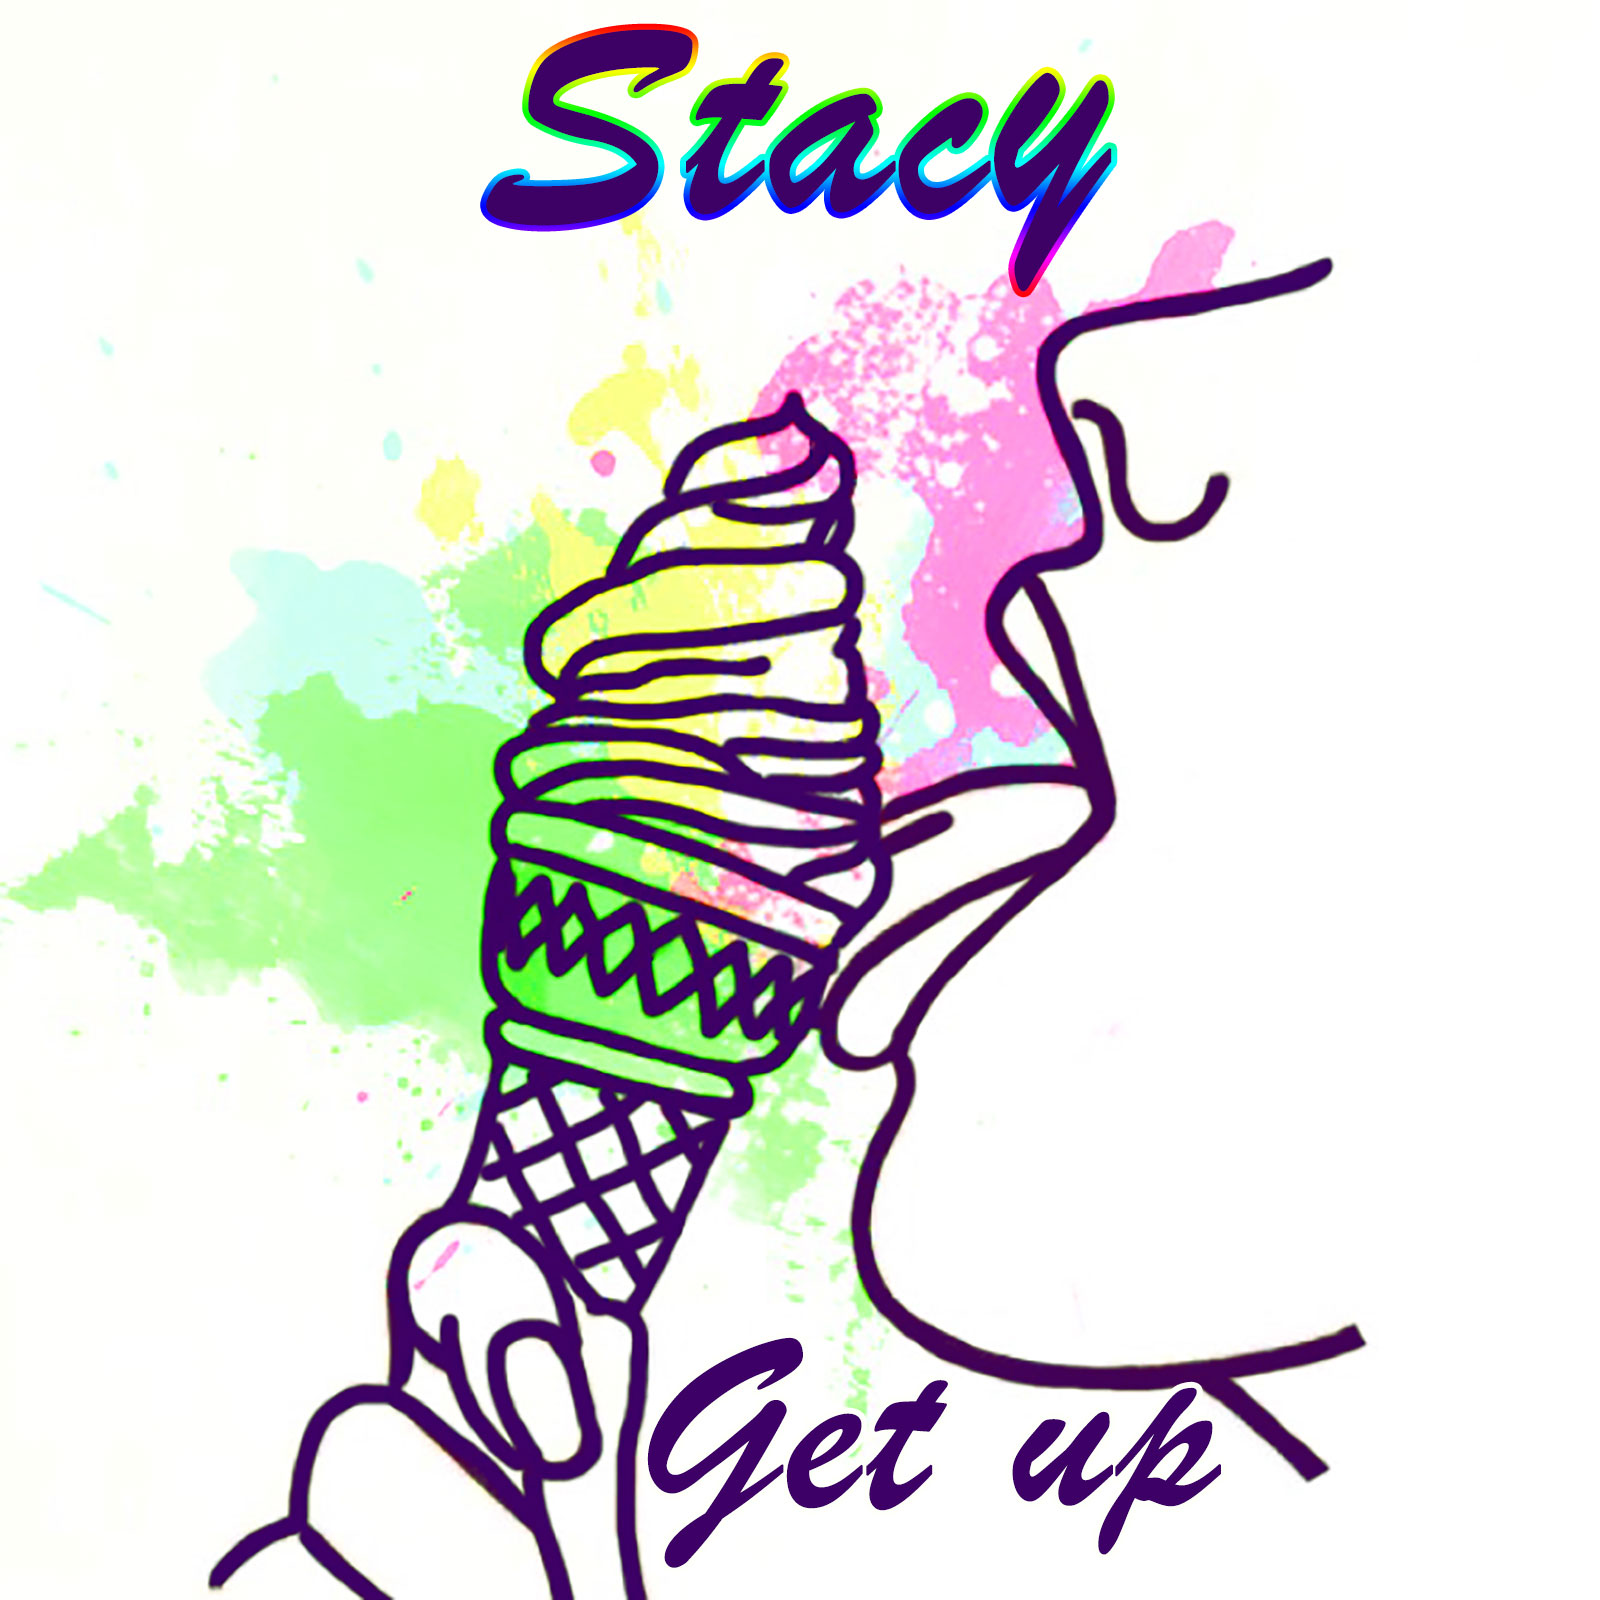 Stacy -Get Up